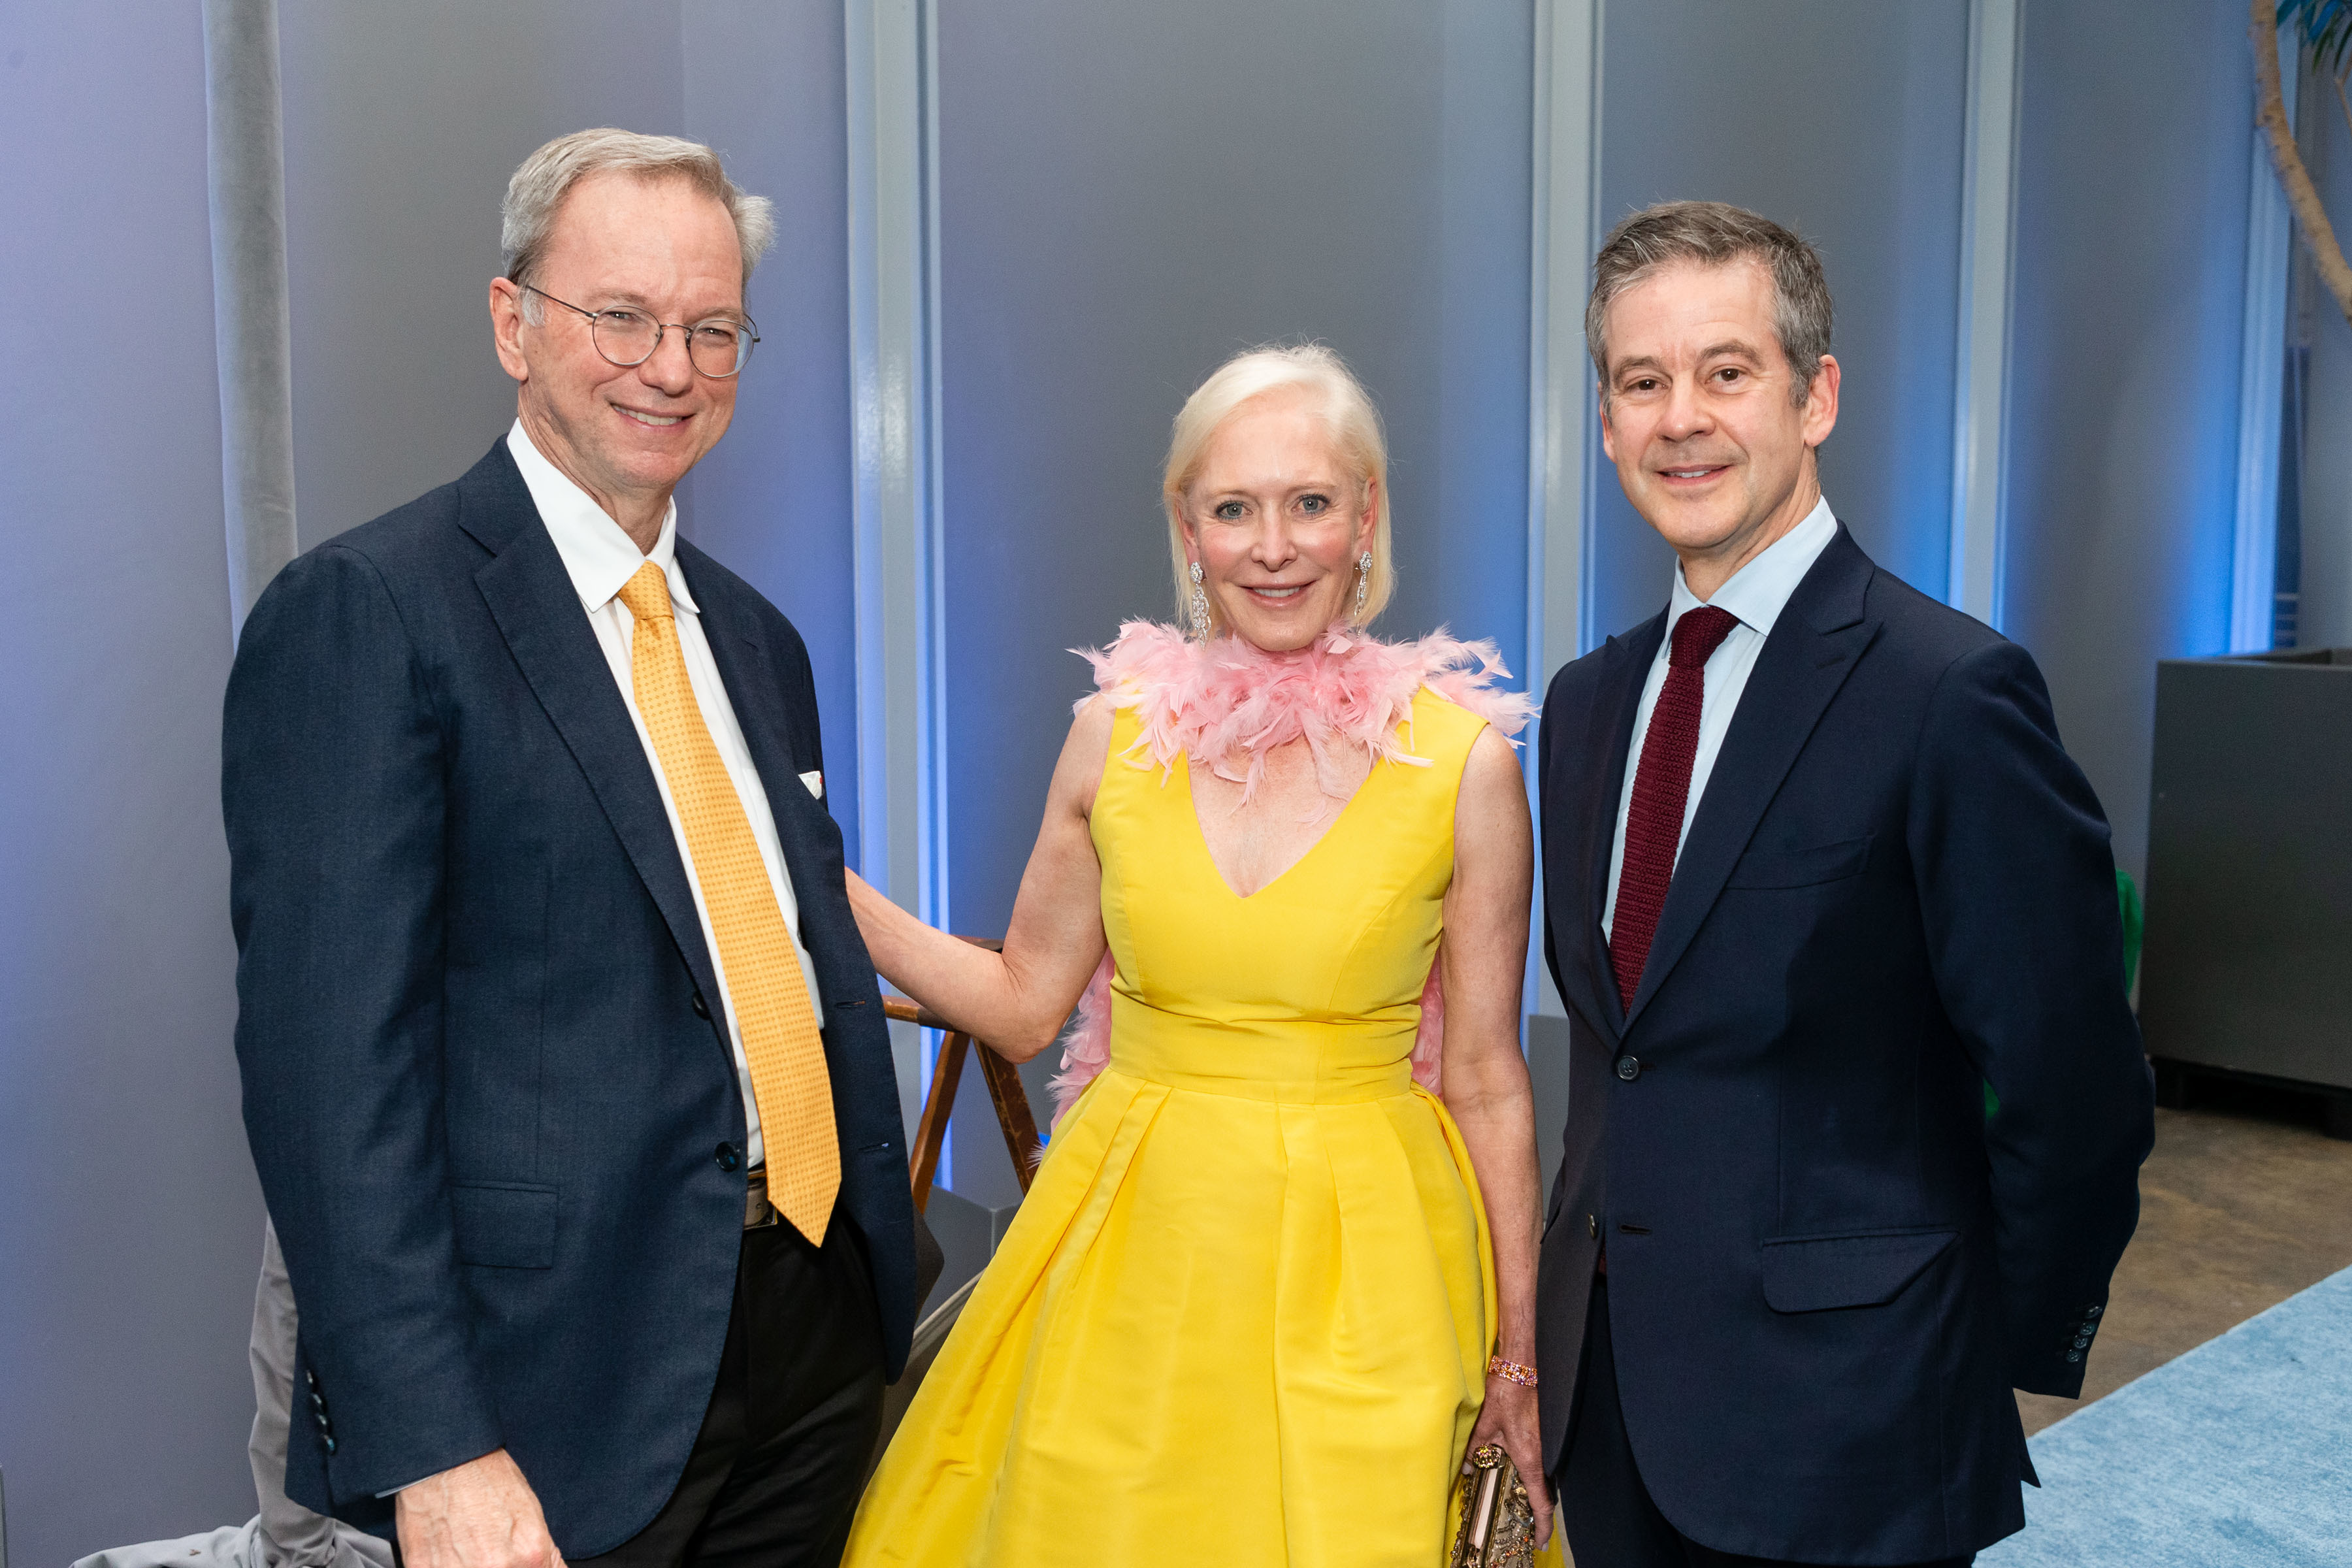 Eric Schmidt, Wendy Schmidt and Henrik Jones attend Big Bang Gala 2019 on April 25th 2019 at California Academy of Sciences in San Francisco, CA (Photo - Arthur Kobin for Drew Altizer Photography)